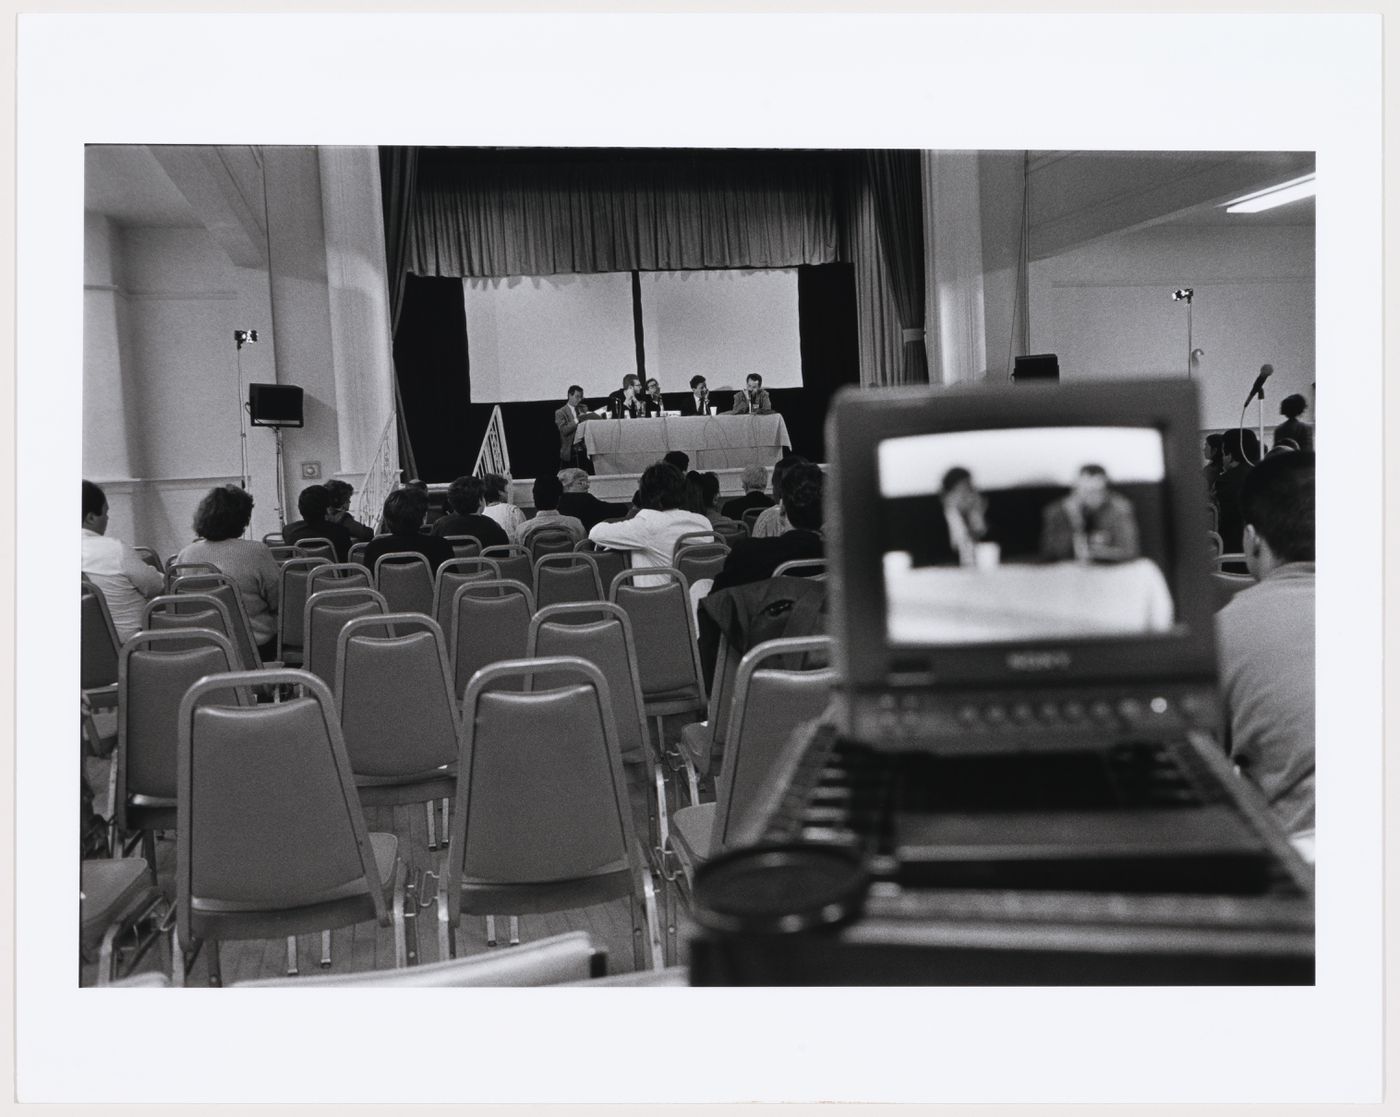 Photograph showing the video recording of the live proceedings of the Anyone conference